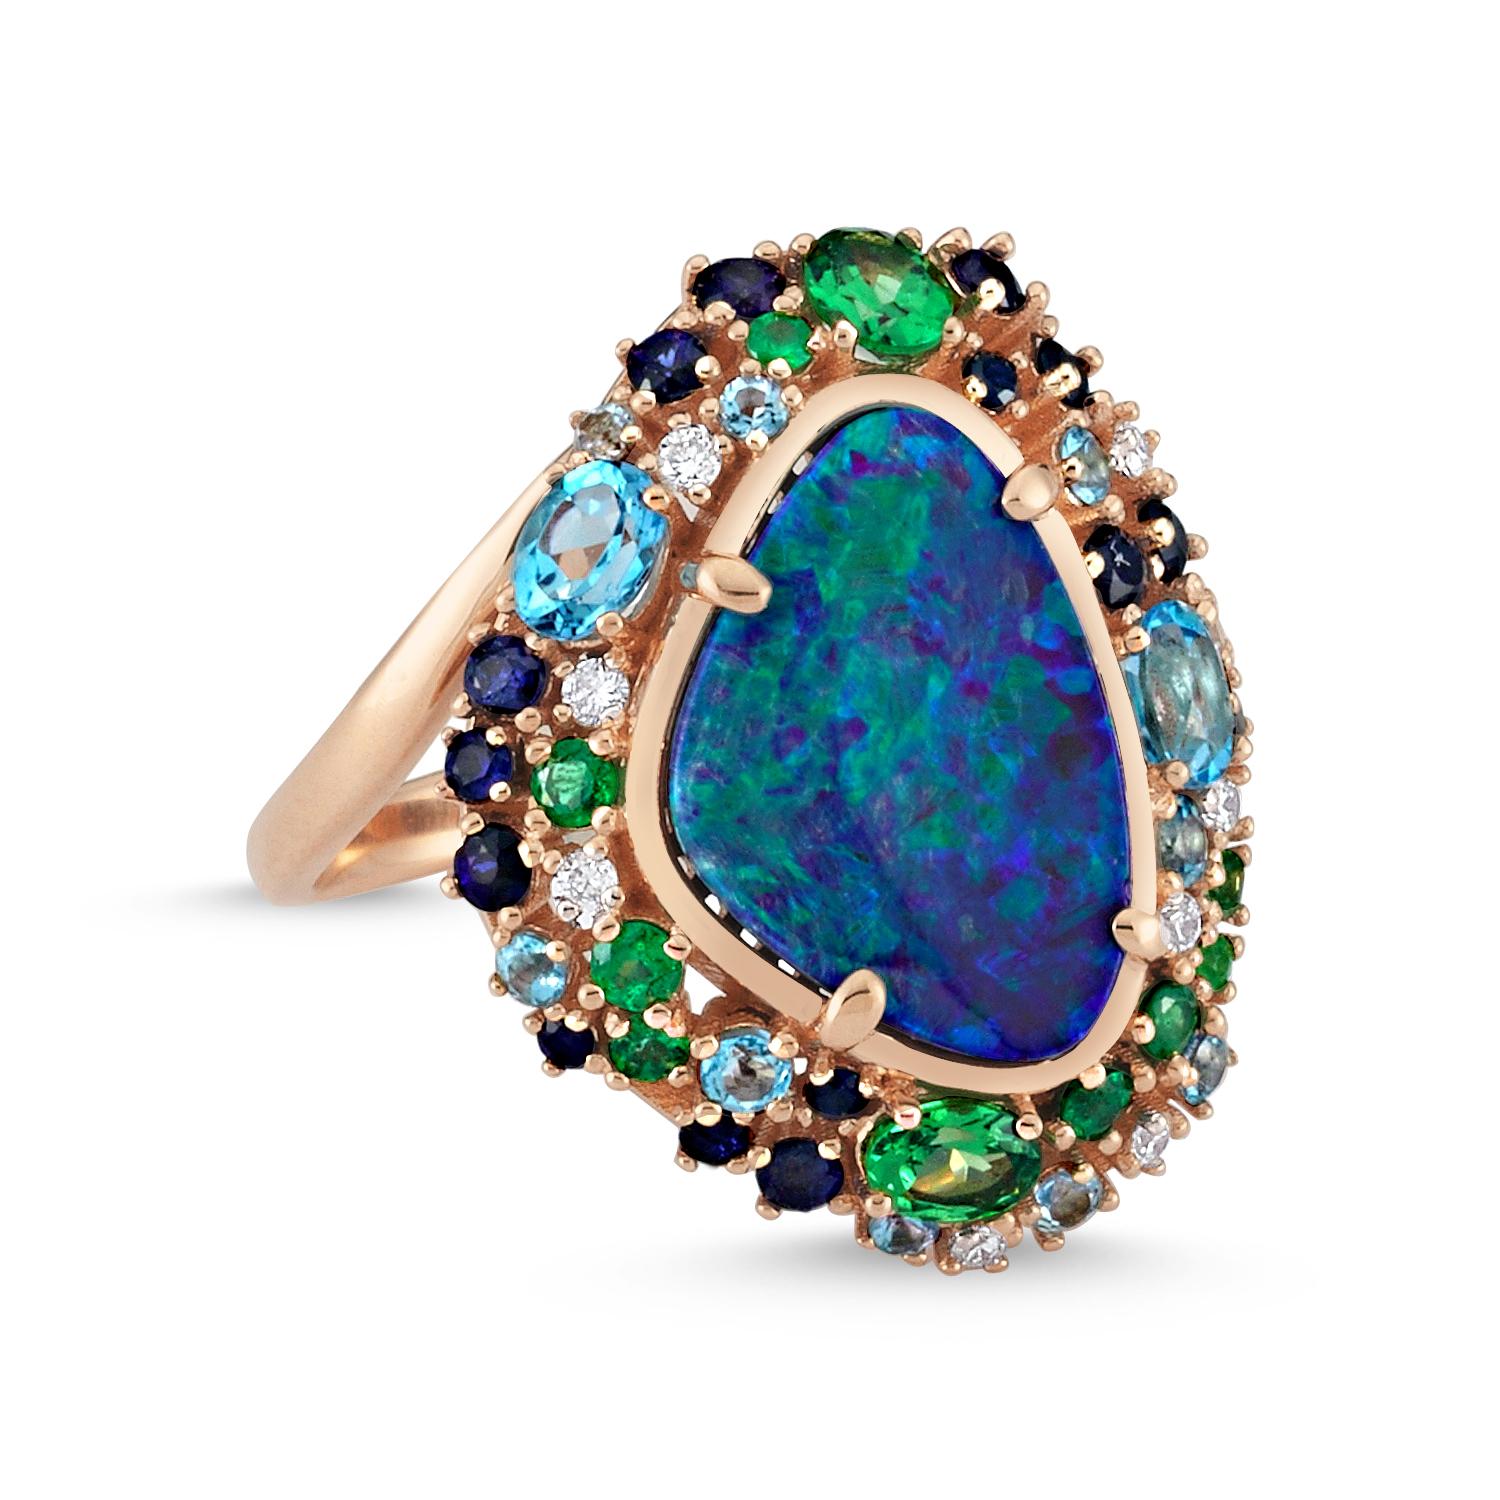 The Treasures of The Sea Collection is inspired by the water element which represents the treasures and natural stones hidden in the depths of the sea.

Oceanic ring in rose gold with blue opal and white diamond by Selda Jewellery

Additional